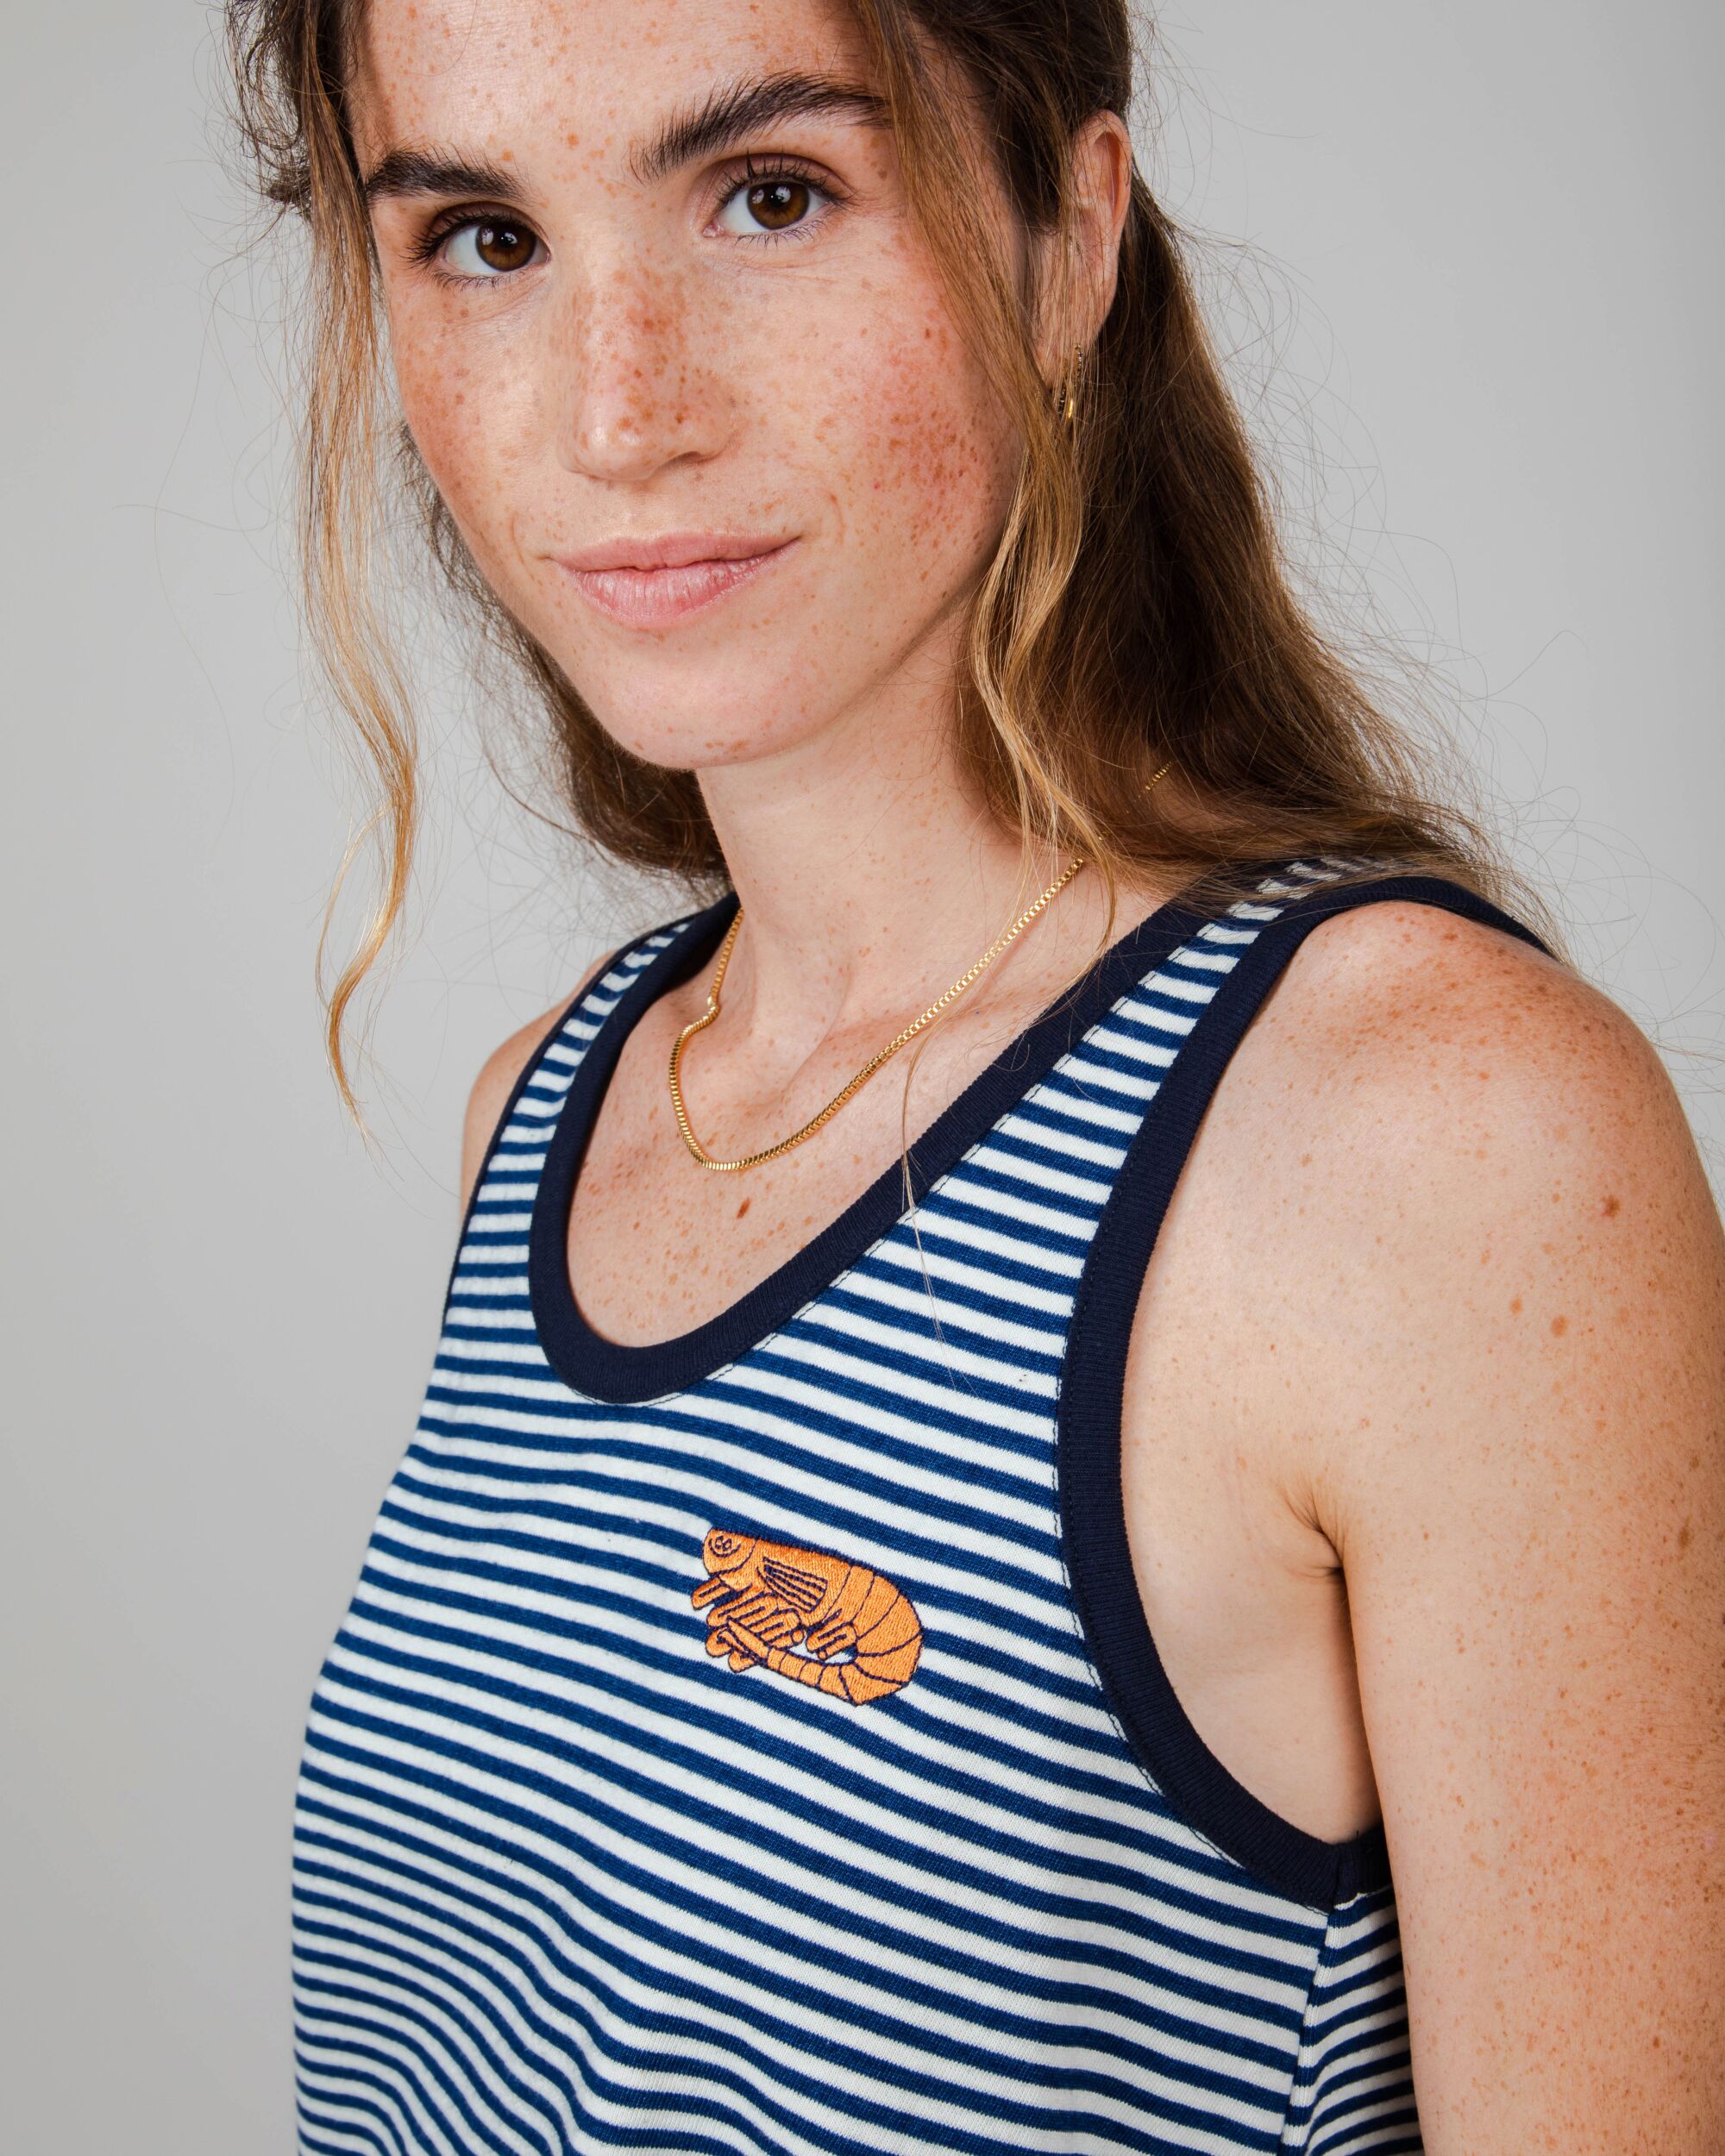 Blue and white striped tank top Gamba Faes made of organic cotton by Brava Fabrics